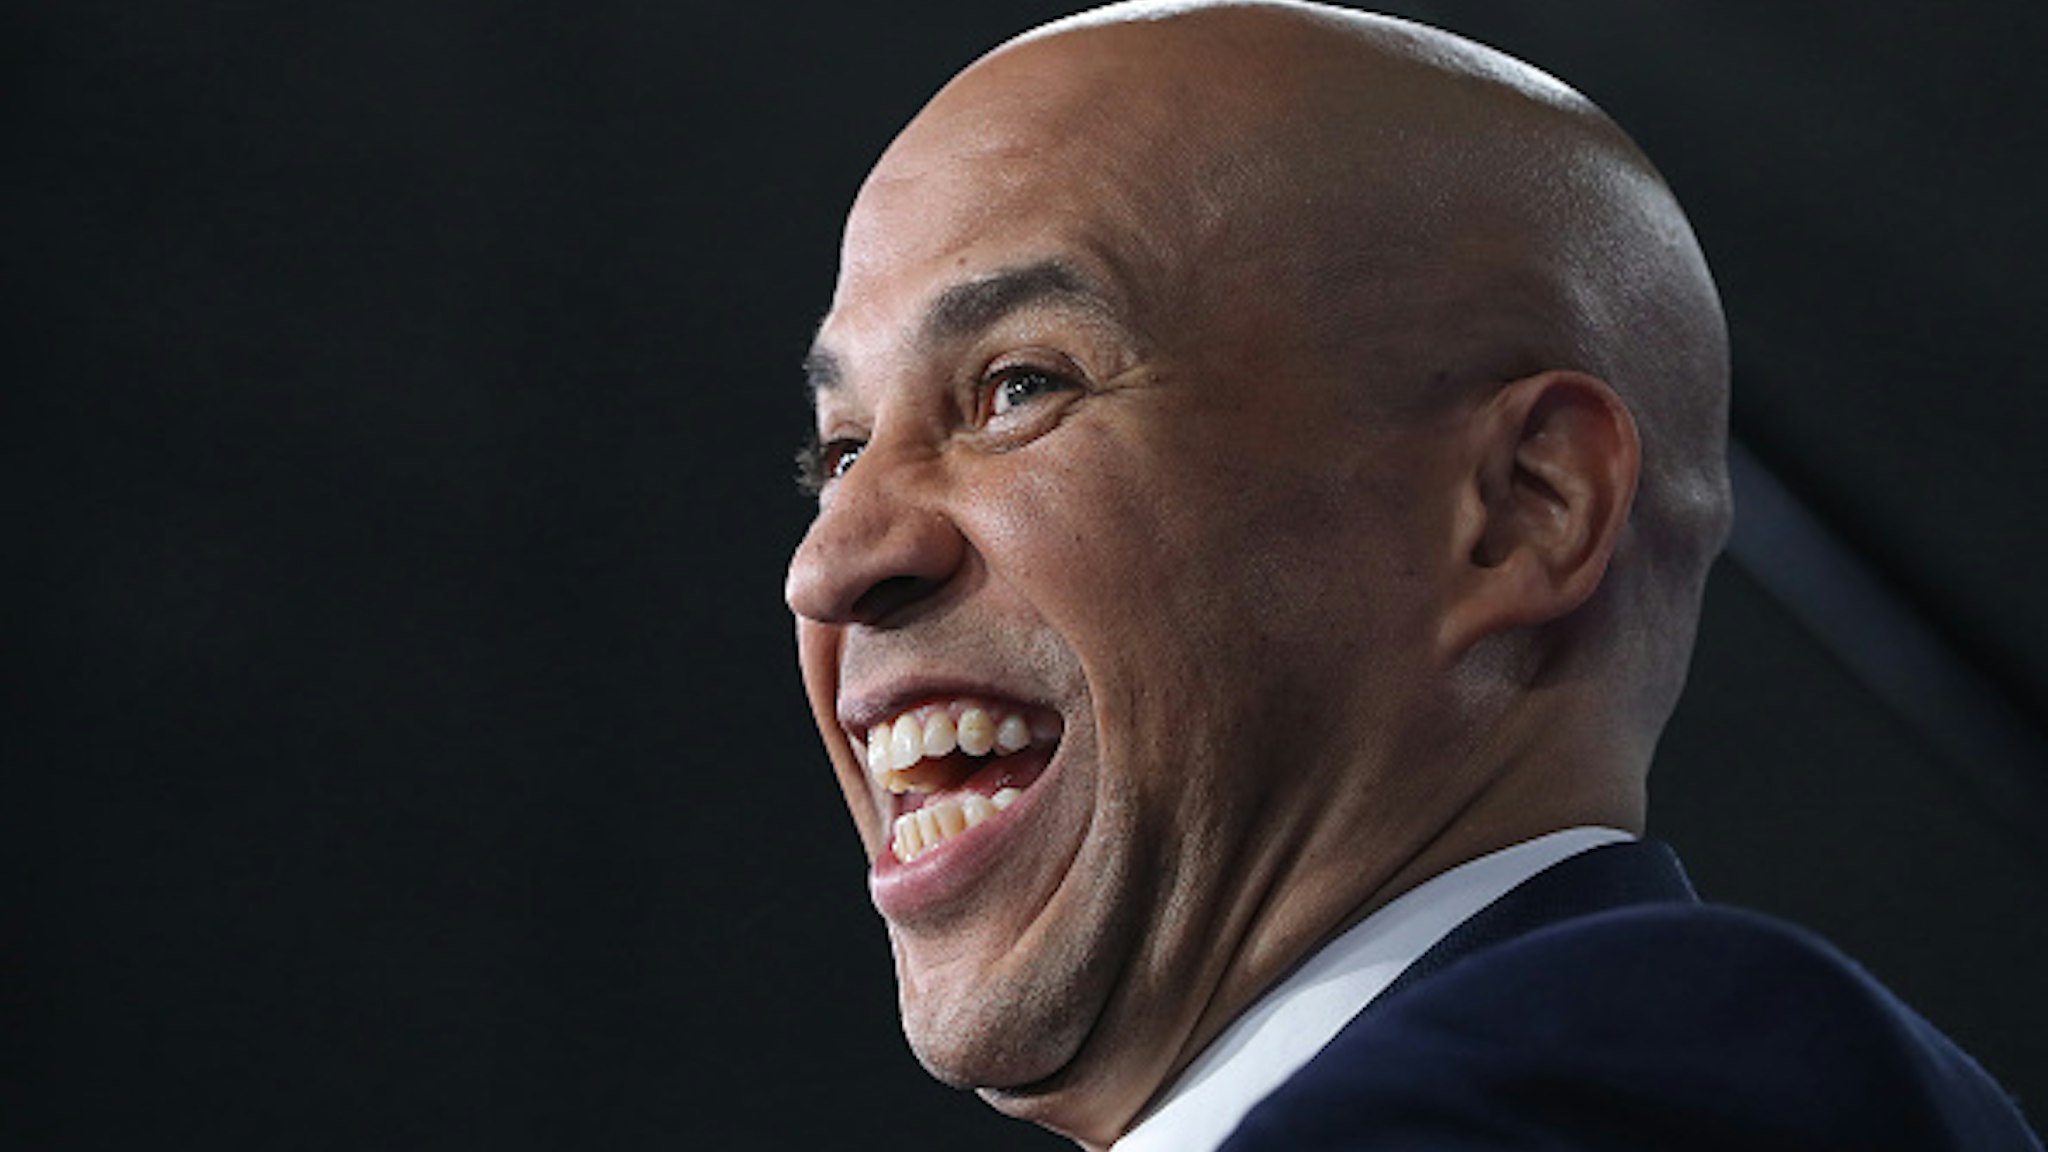 ATLANTA, GEORGIA - NOVEMBER 20: Sen. Cory Booker (D-NJ) laughs during a television interview after the Democratic Presidential Debate at Tyler Perry Studios November 20, 2019 in Atlanta, Georgia. Ten Democratic presidential hopefuls were chosen from the larger field of candidates to participate in the debate hosted by MSNBC and The Washington Post.